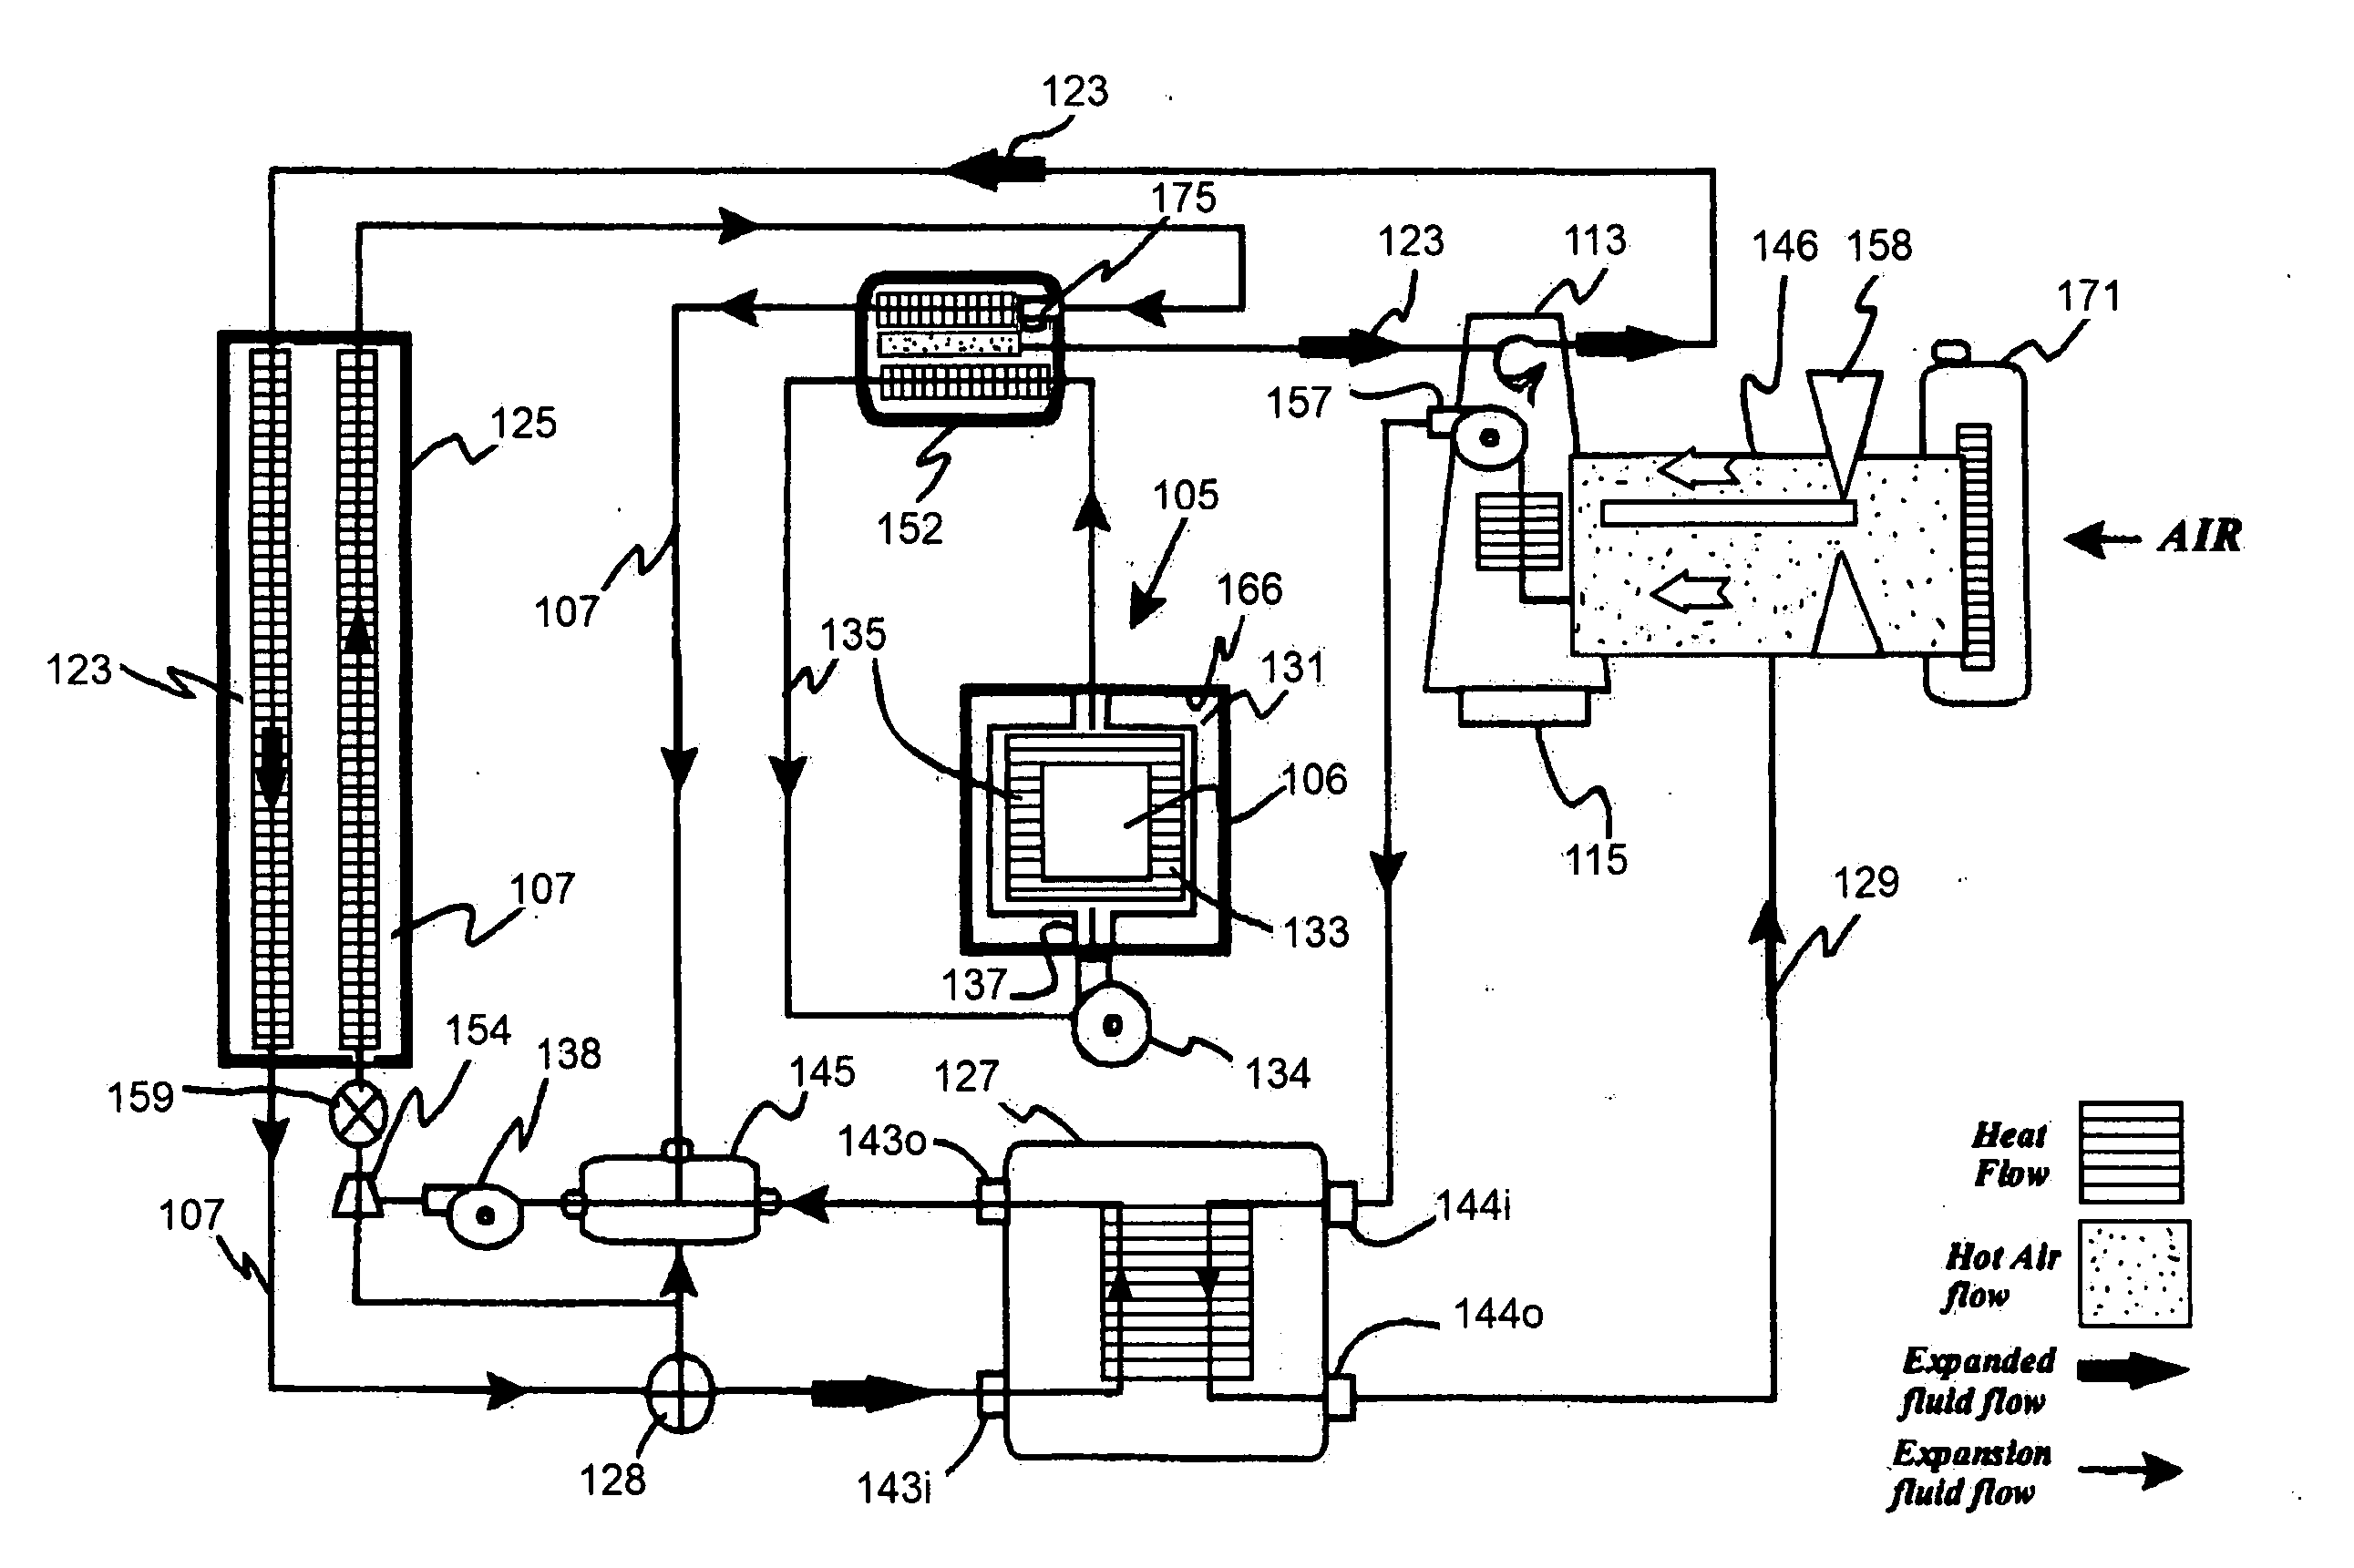 Thermal engine using noncombustible fuels for powering transport vehicles and other uses